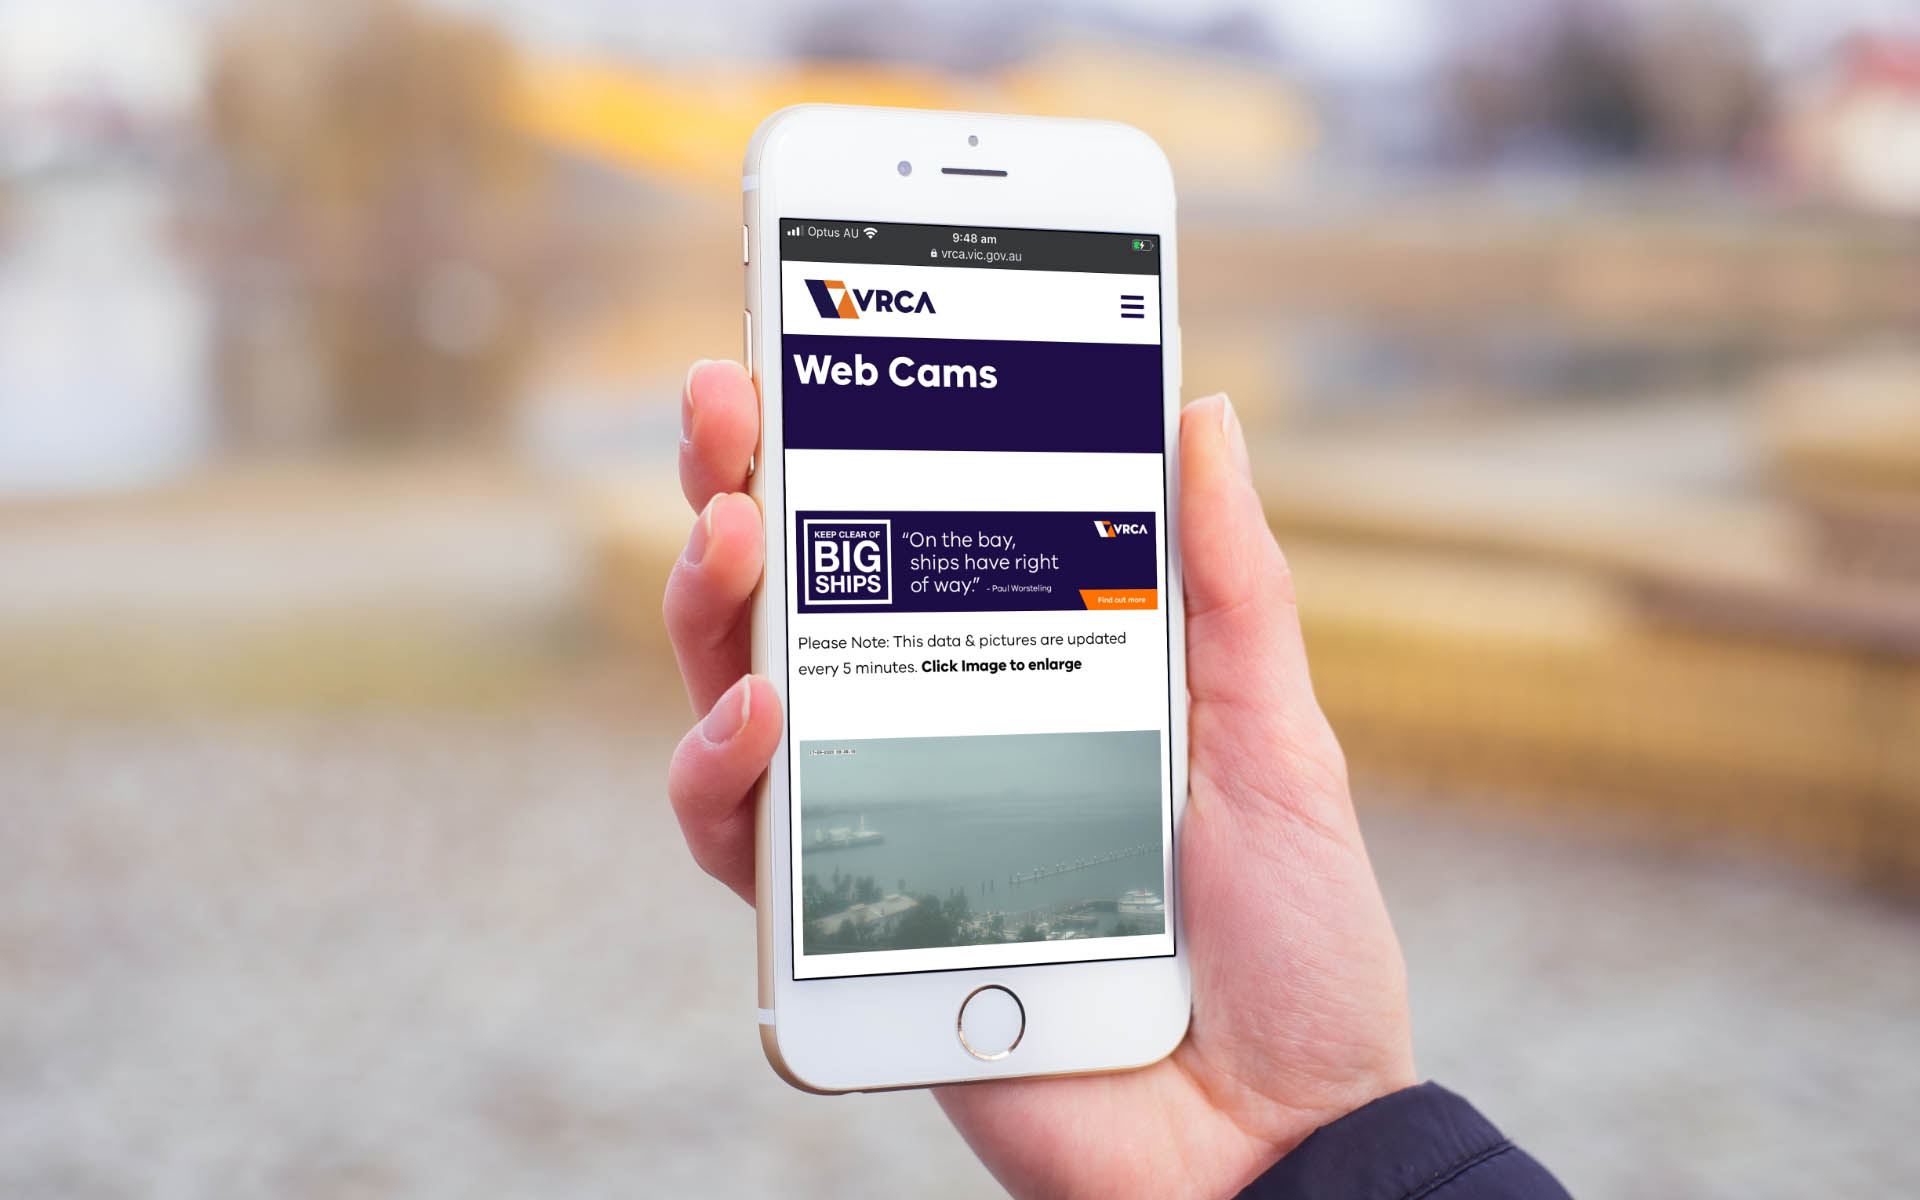 VRCA website homepage shown on mobile device